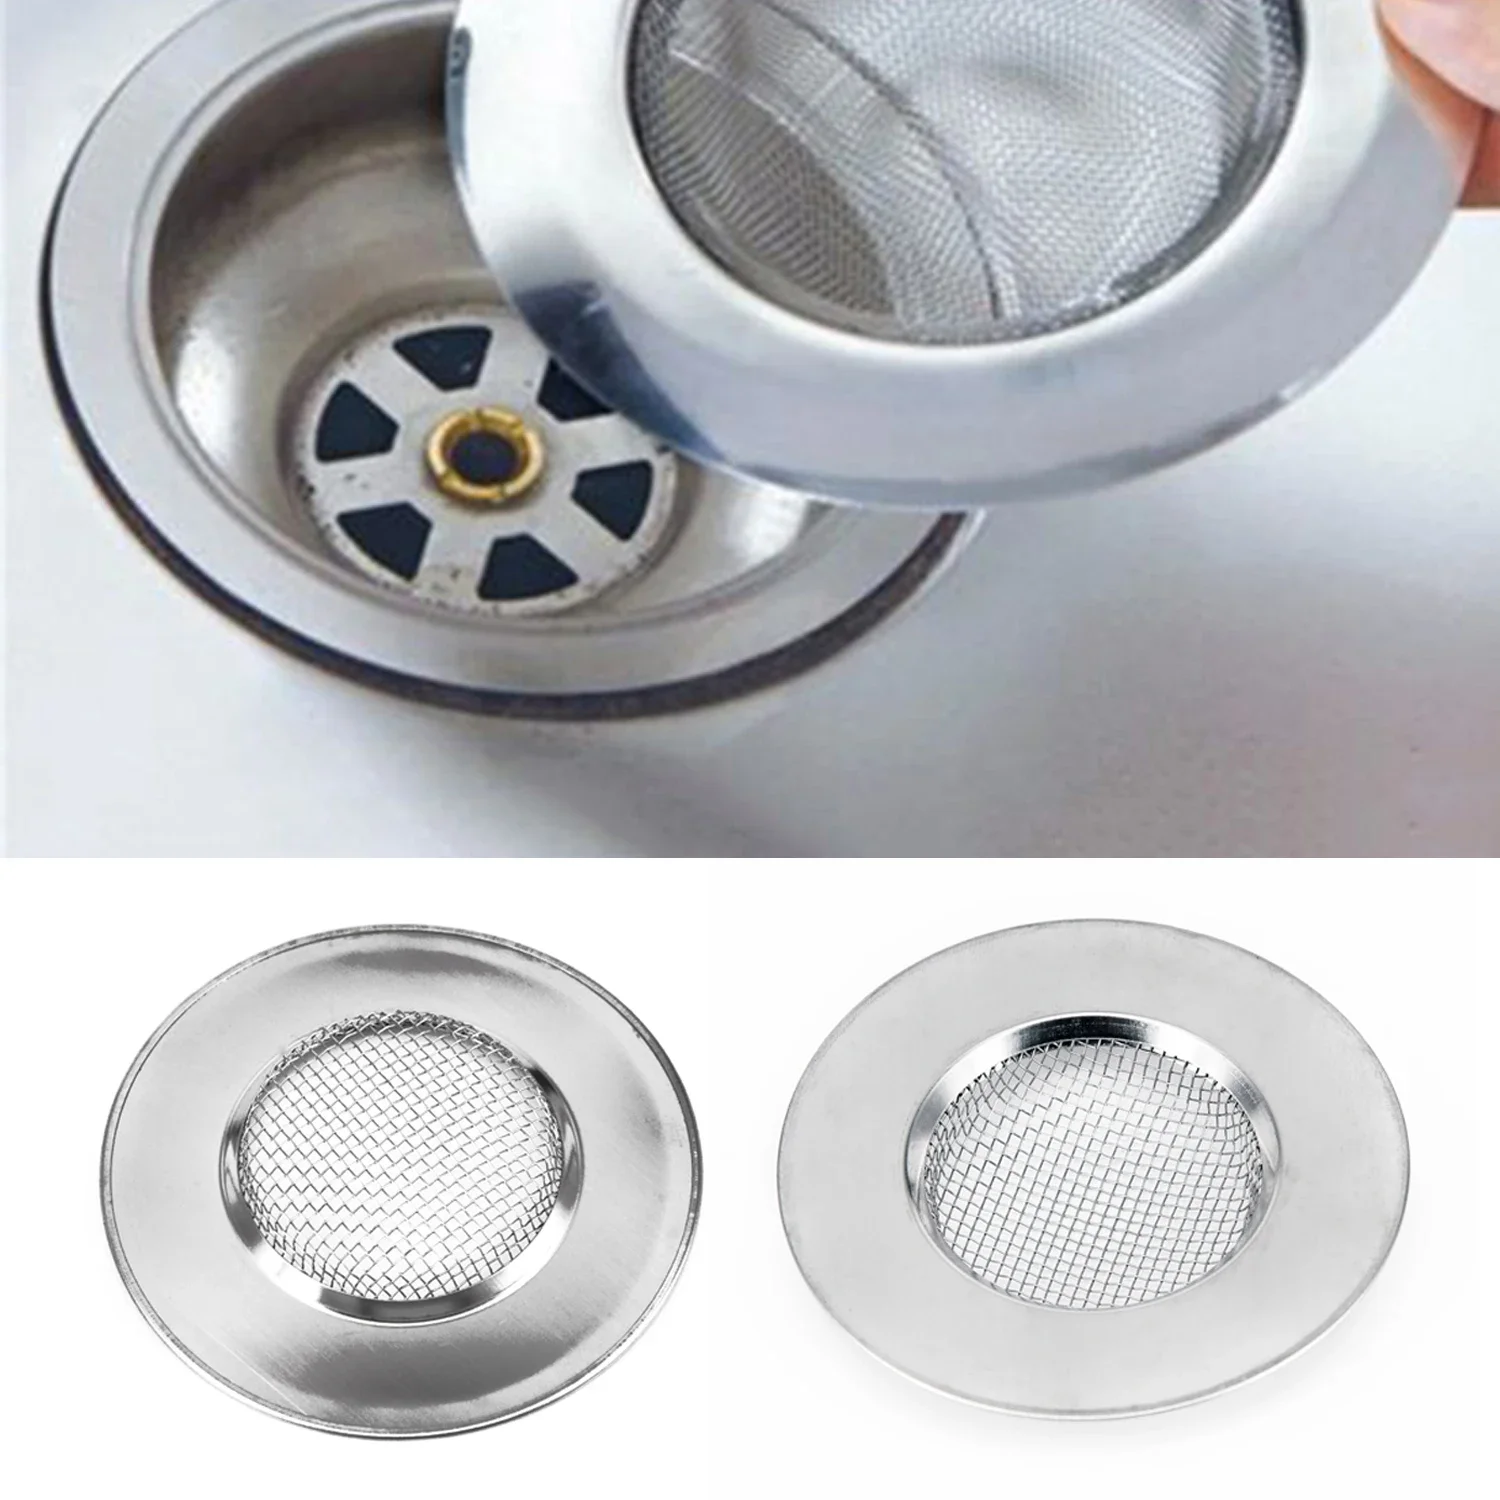 Stainless Steel Bathtub Hair Catcher Stopper Shower Drain Hole Filter With Handle Metal Sink Strainer Floor Drain For Kitchenl outad stainless steel bathtub hair catcher stopper shower drain hole filter trap kitchen metal sink strainer floor drain